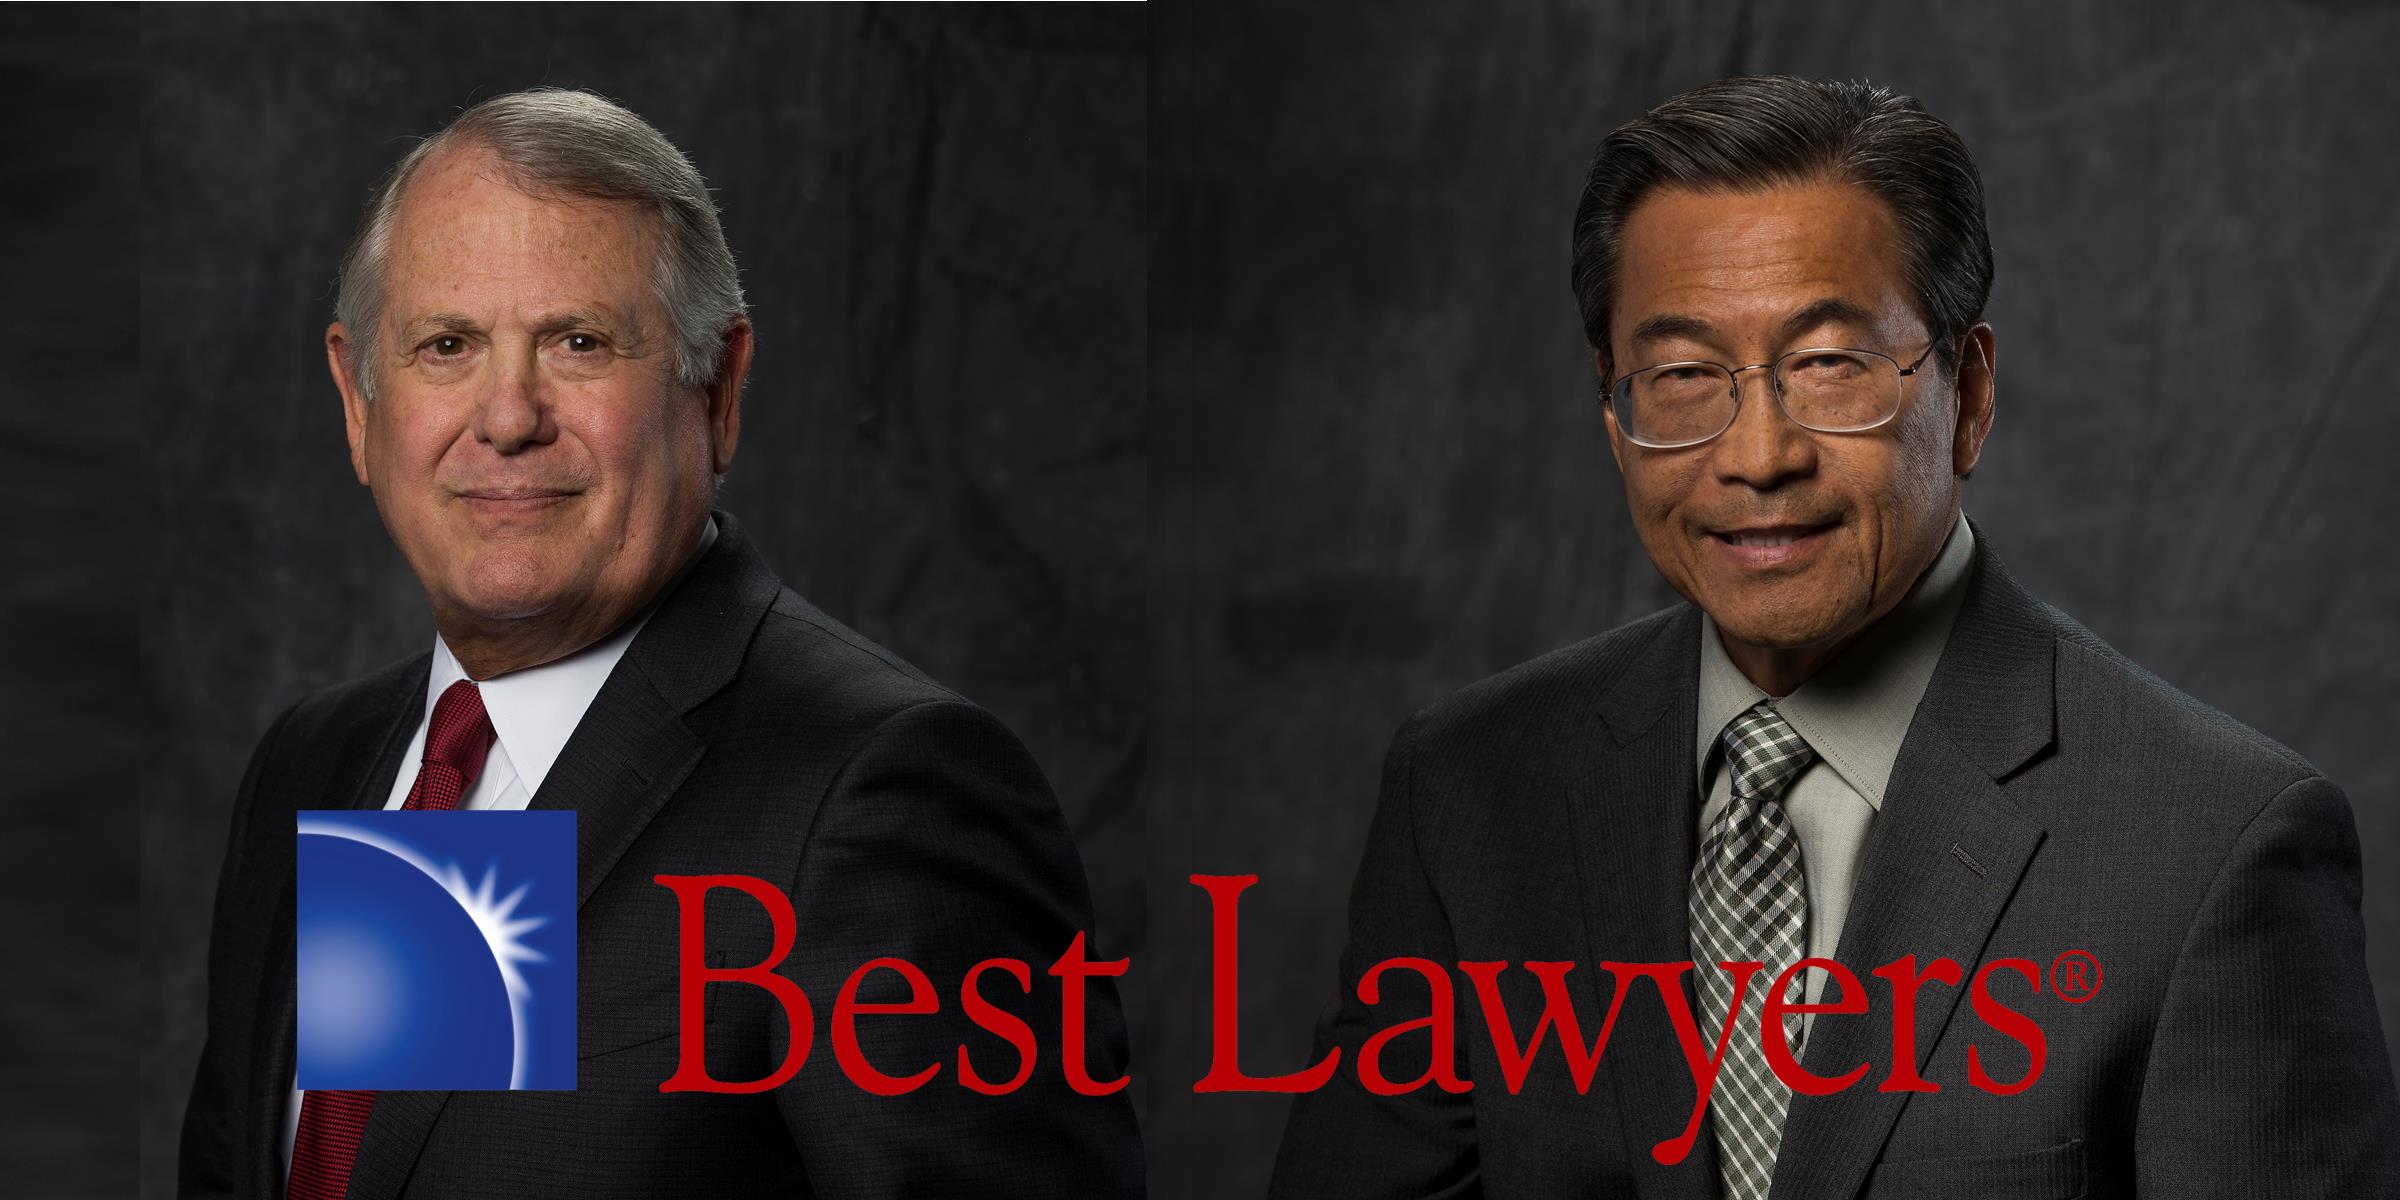 David Cohn, James Yoro of Chain | Cohn | Clark selected to 2019 ‘Best Lawyers in America’ publication